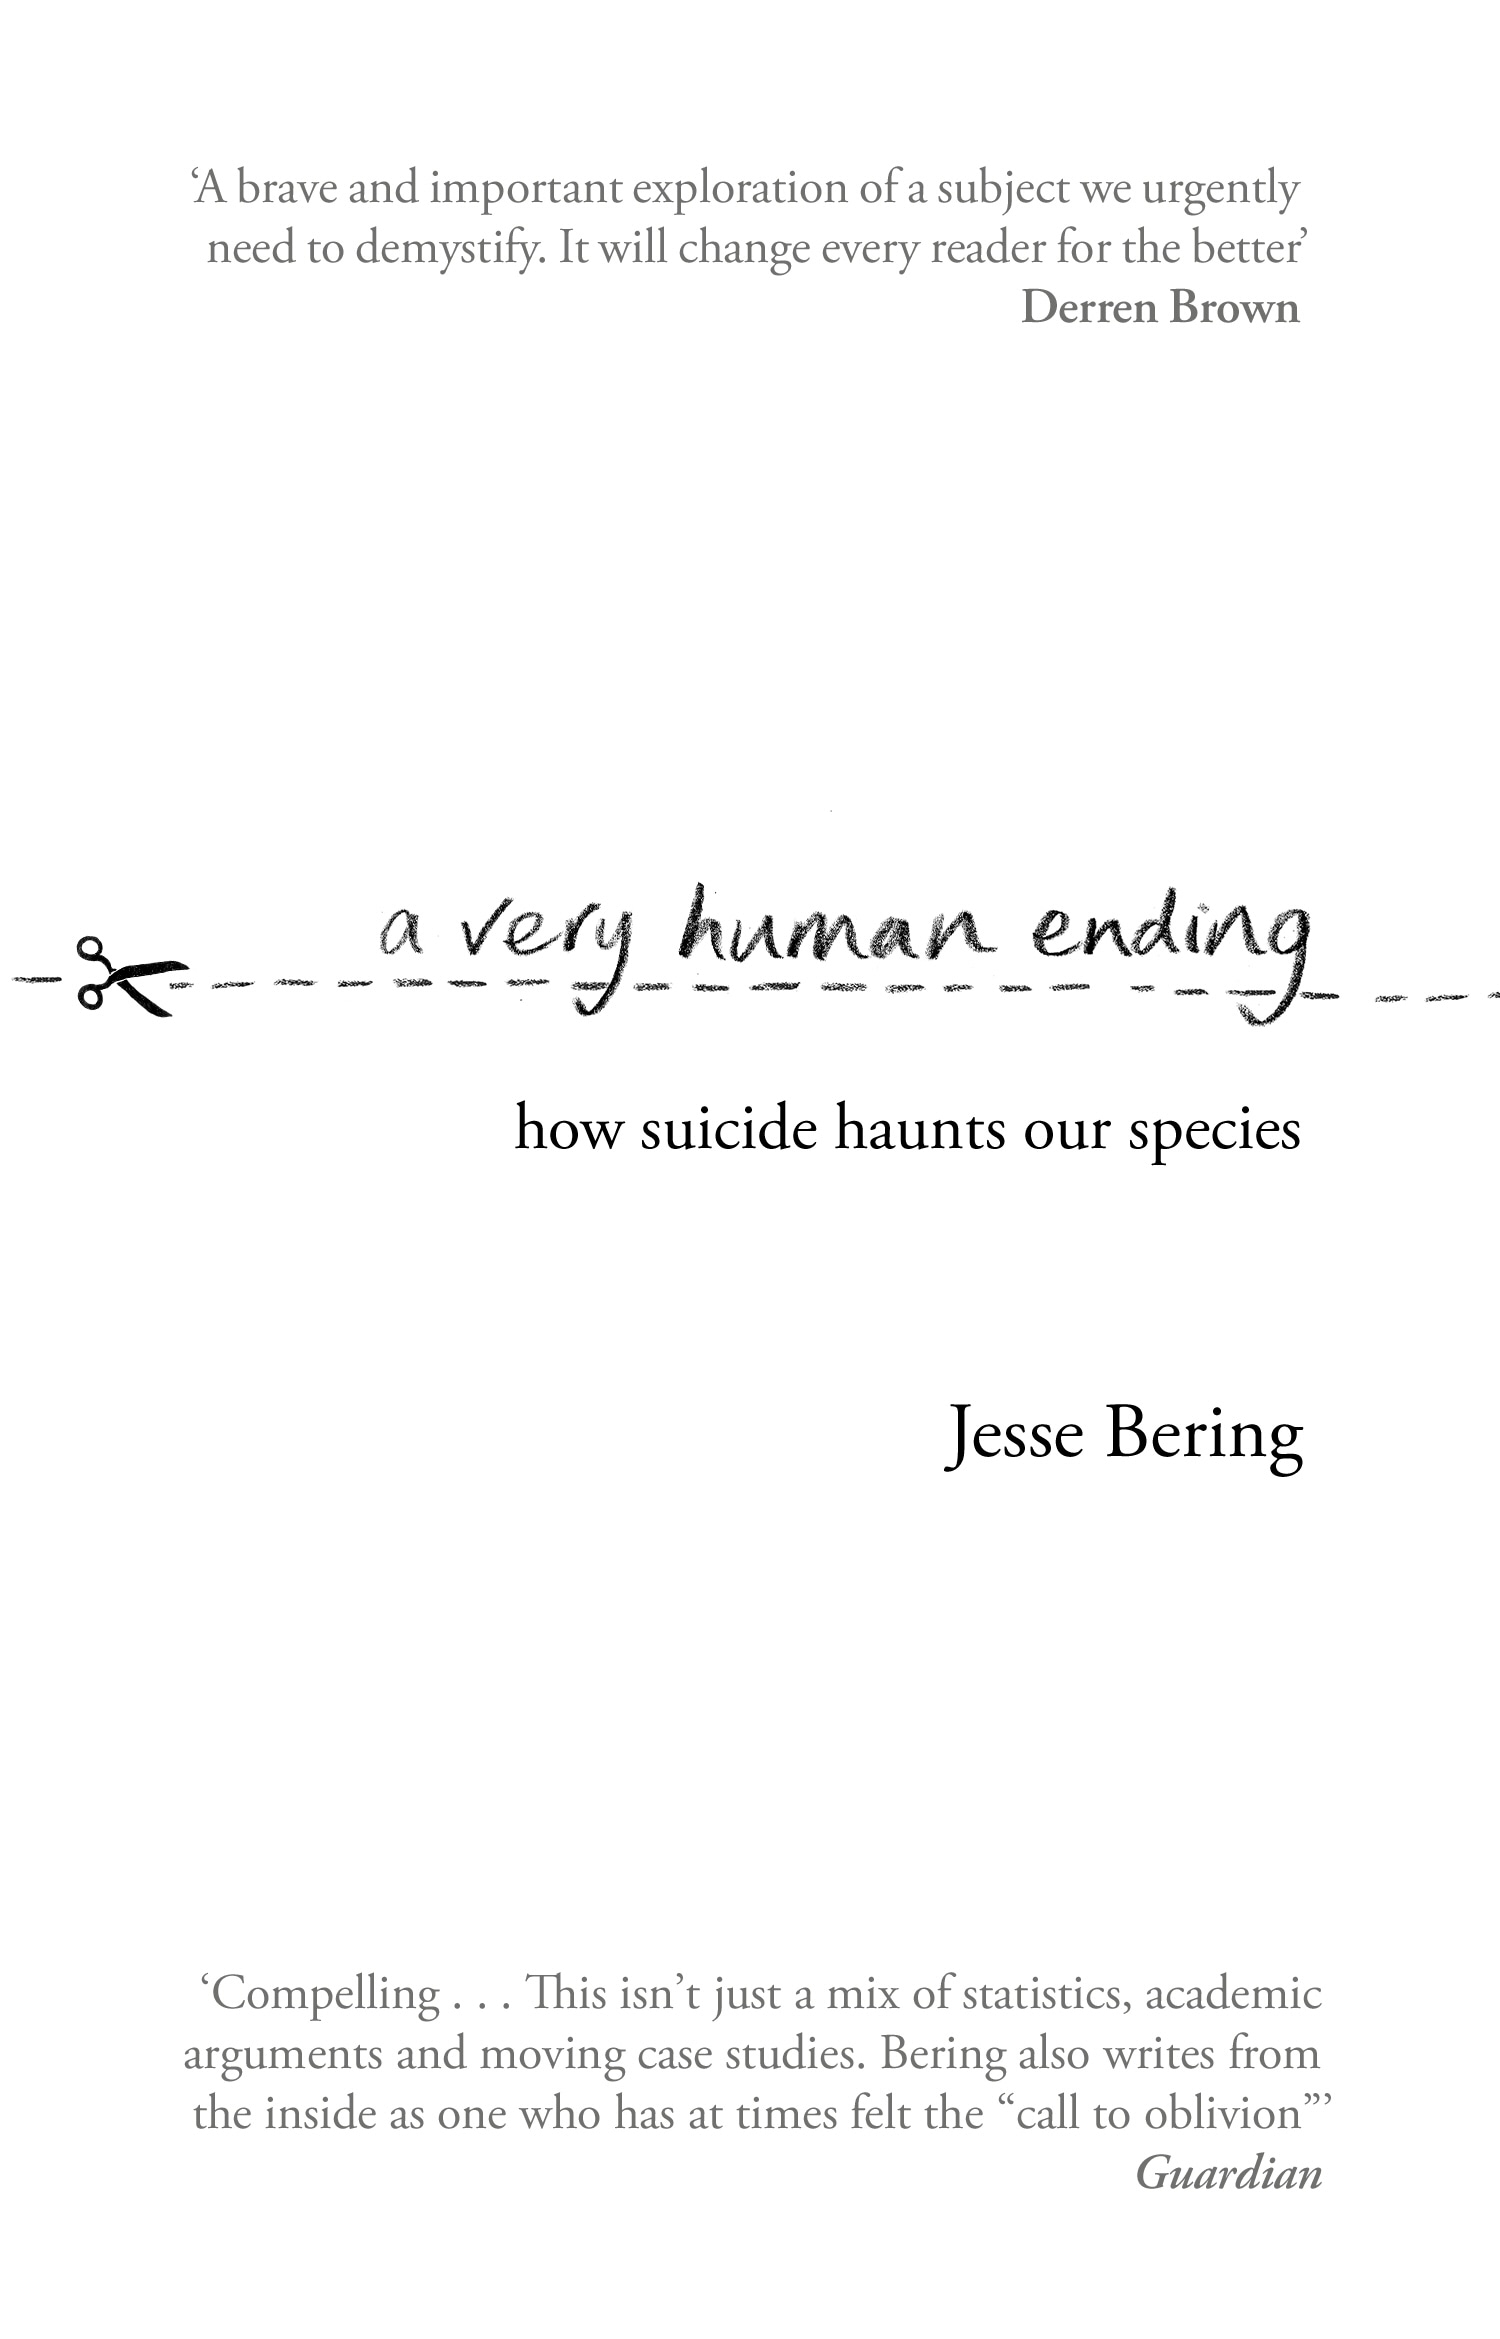 Book “A Very Human Ending” by Jesse Bering — July 11, 2019